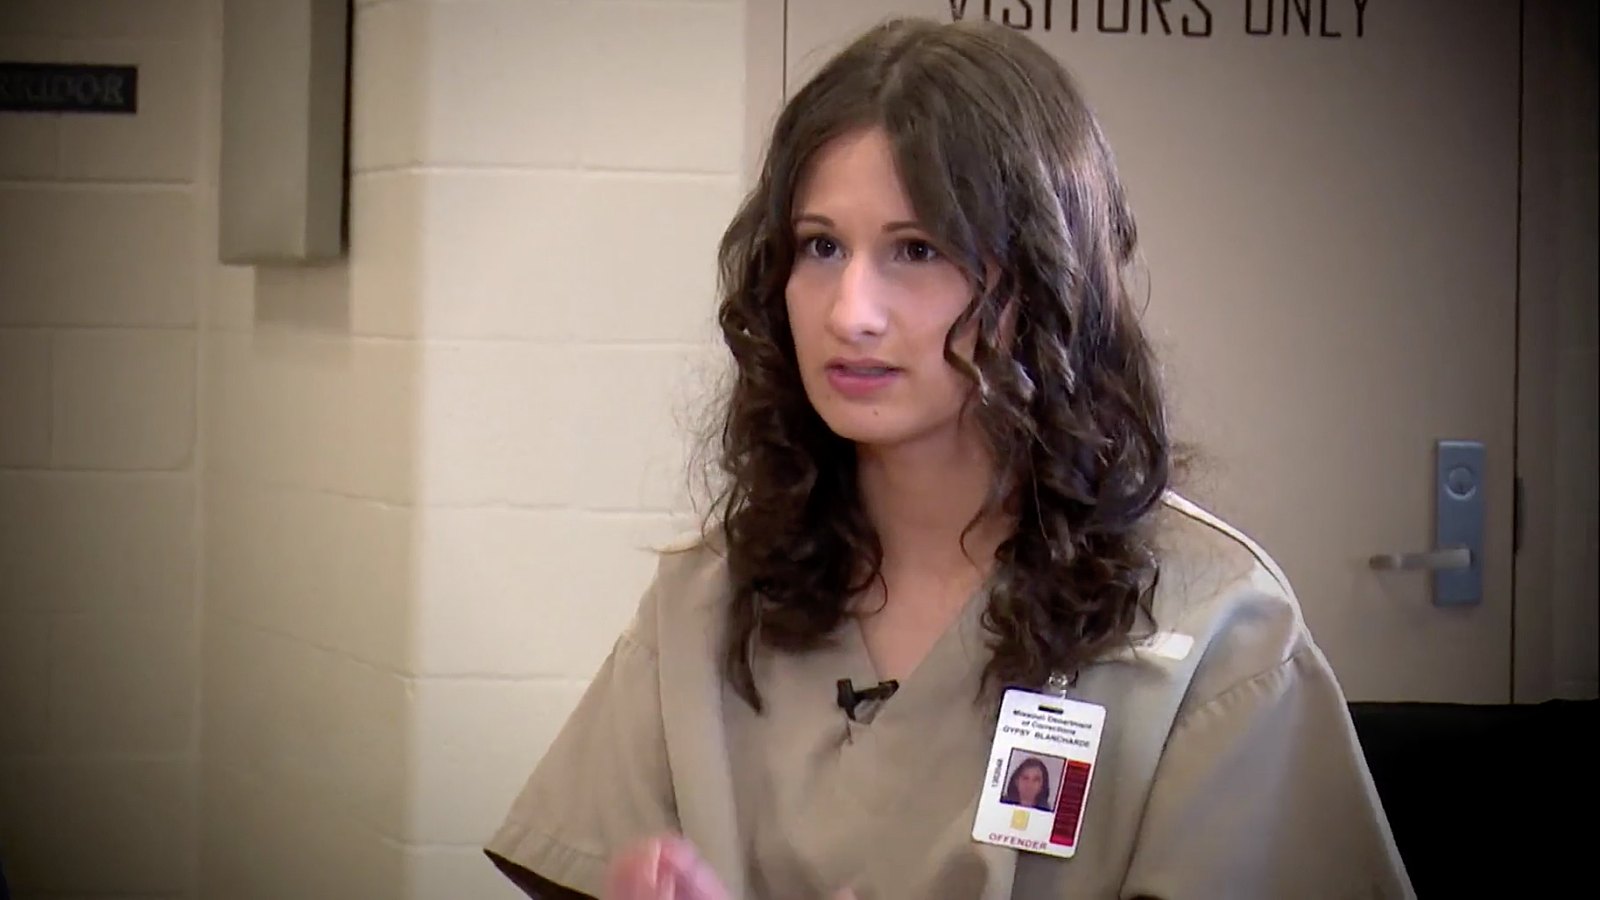 Gypsy Rose Blanchard Will Have an InPrison Wedding to Fiance Ken